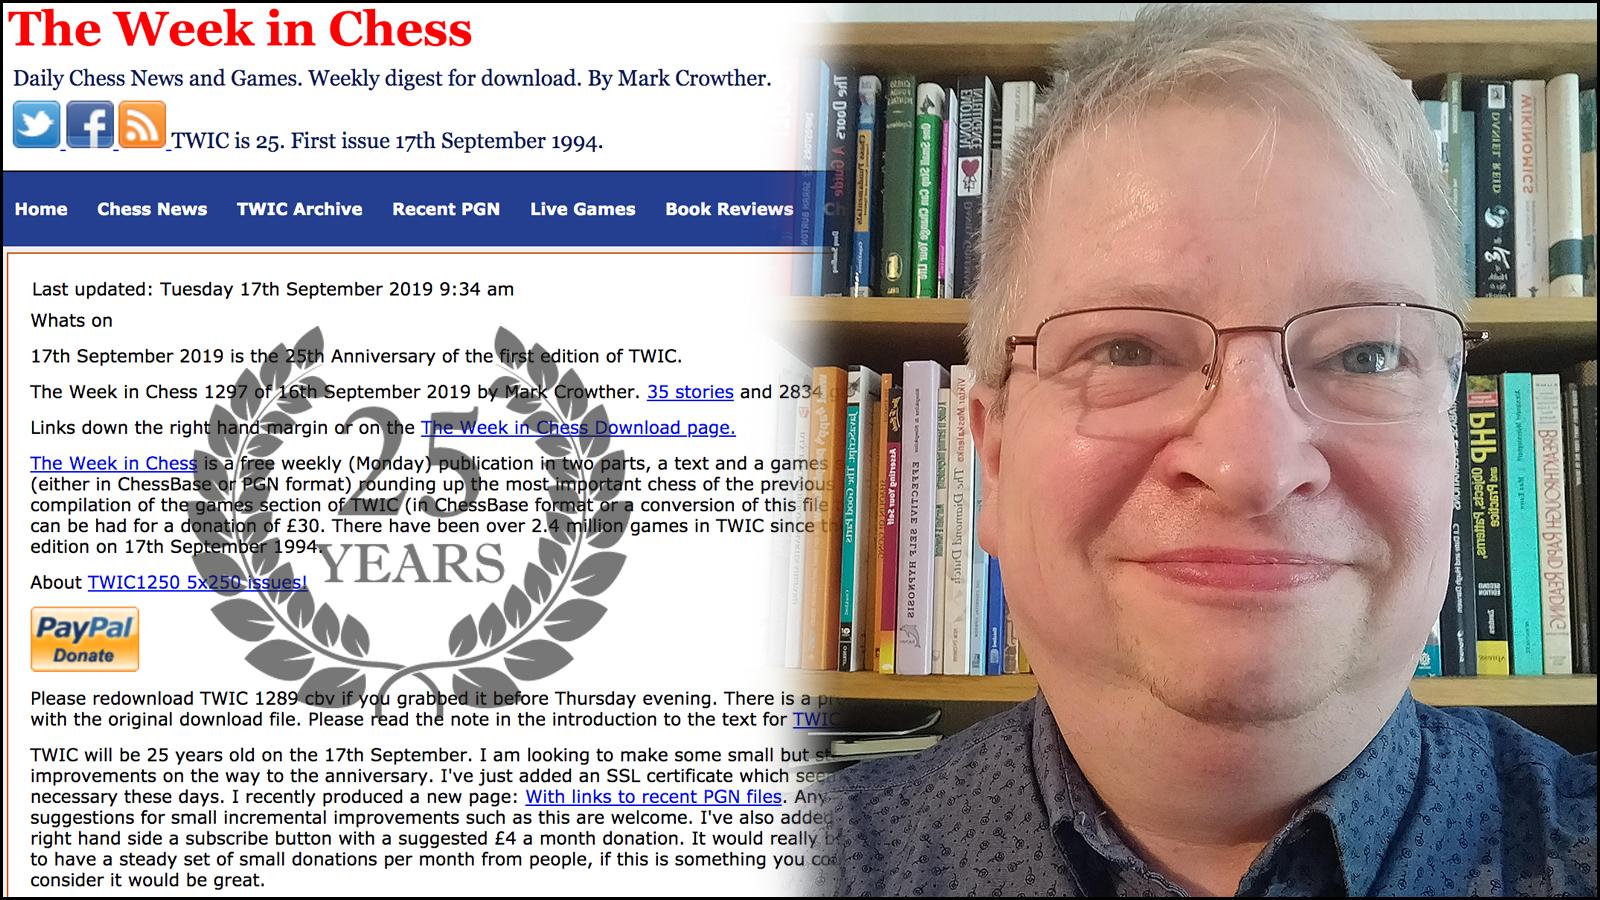 The Week in Chess 949